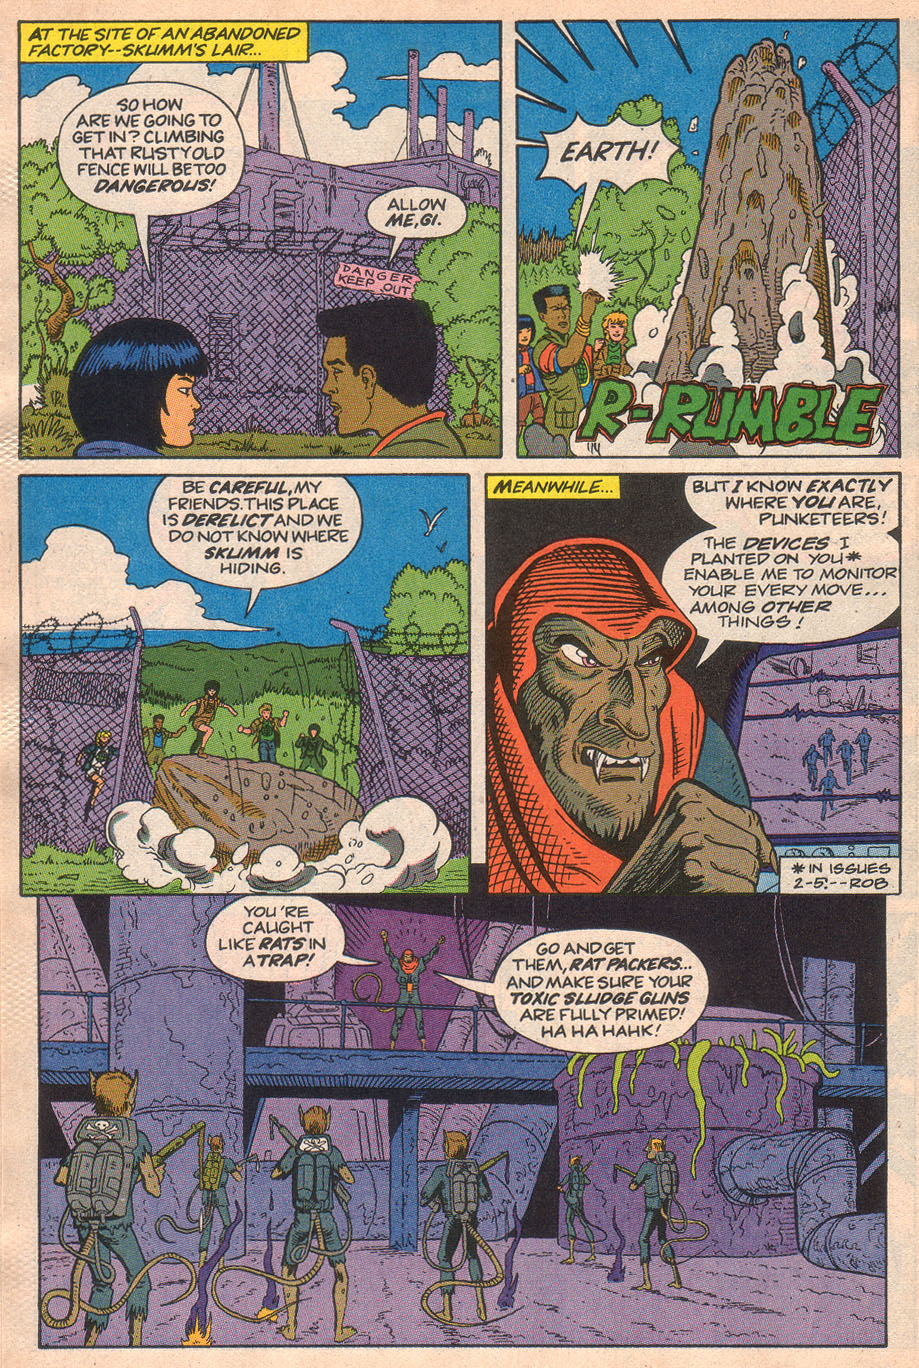 Captain Planet and the Planeteers 6 Page 19